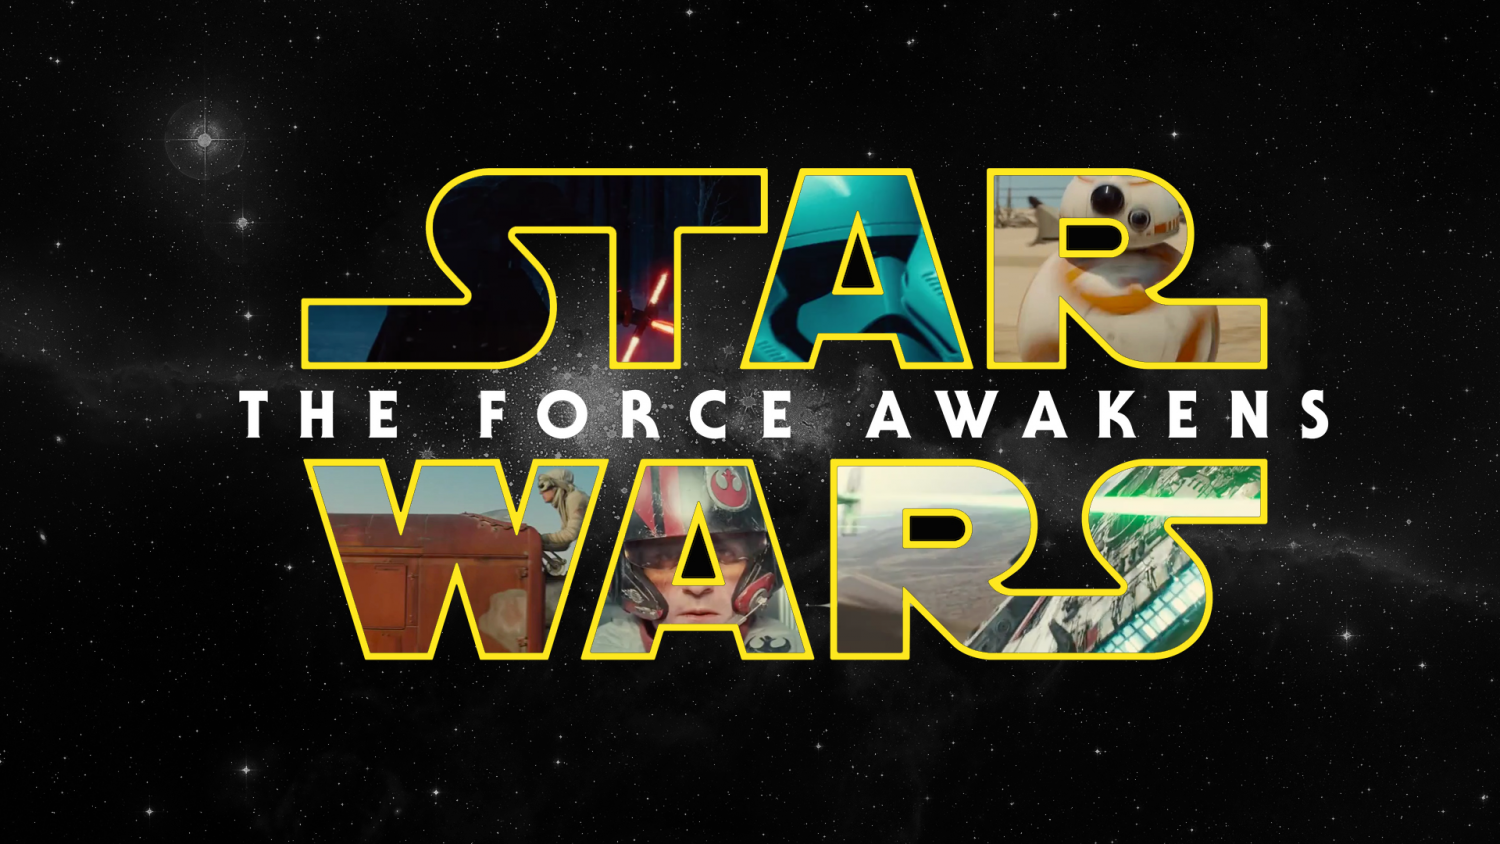 ‘star wars: the force awakens’ for a new generation